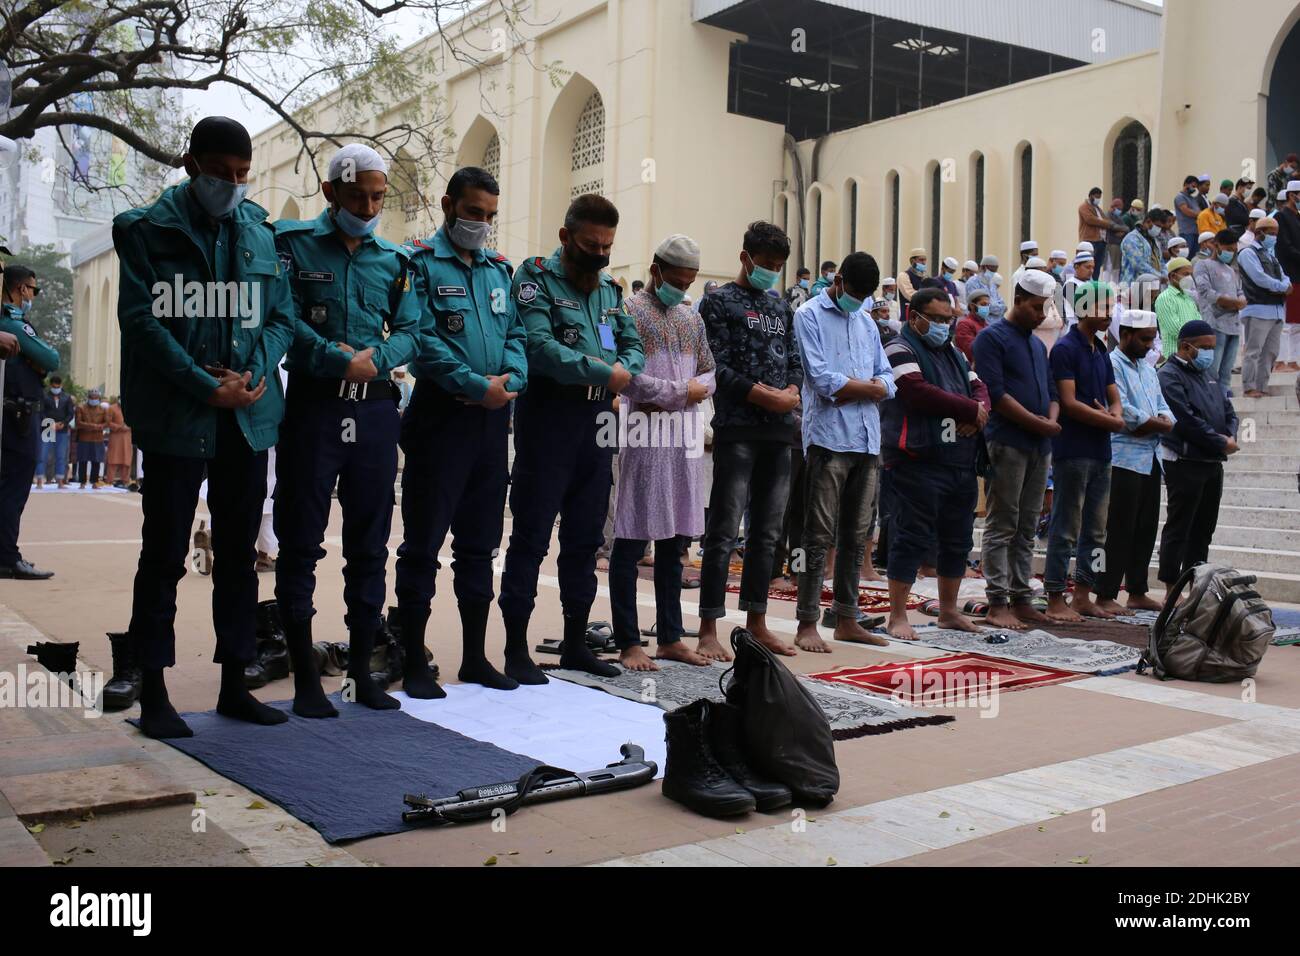 December 11, 2020: People are performing friday prayer during COVID-19 pandemic. Credit: Md. Rakibul Hasan/ZUMA Wire/Alamy Live News Stock Photo